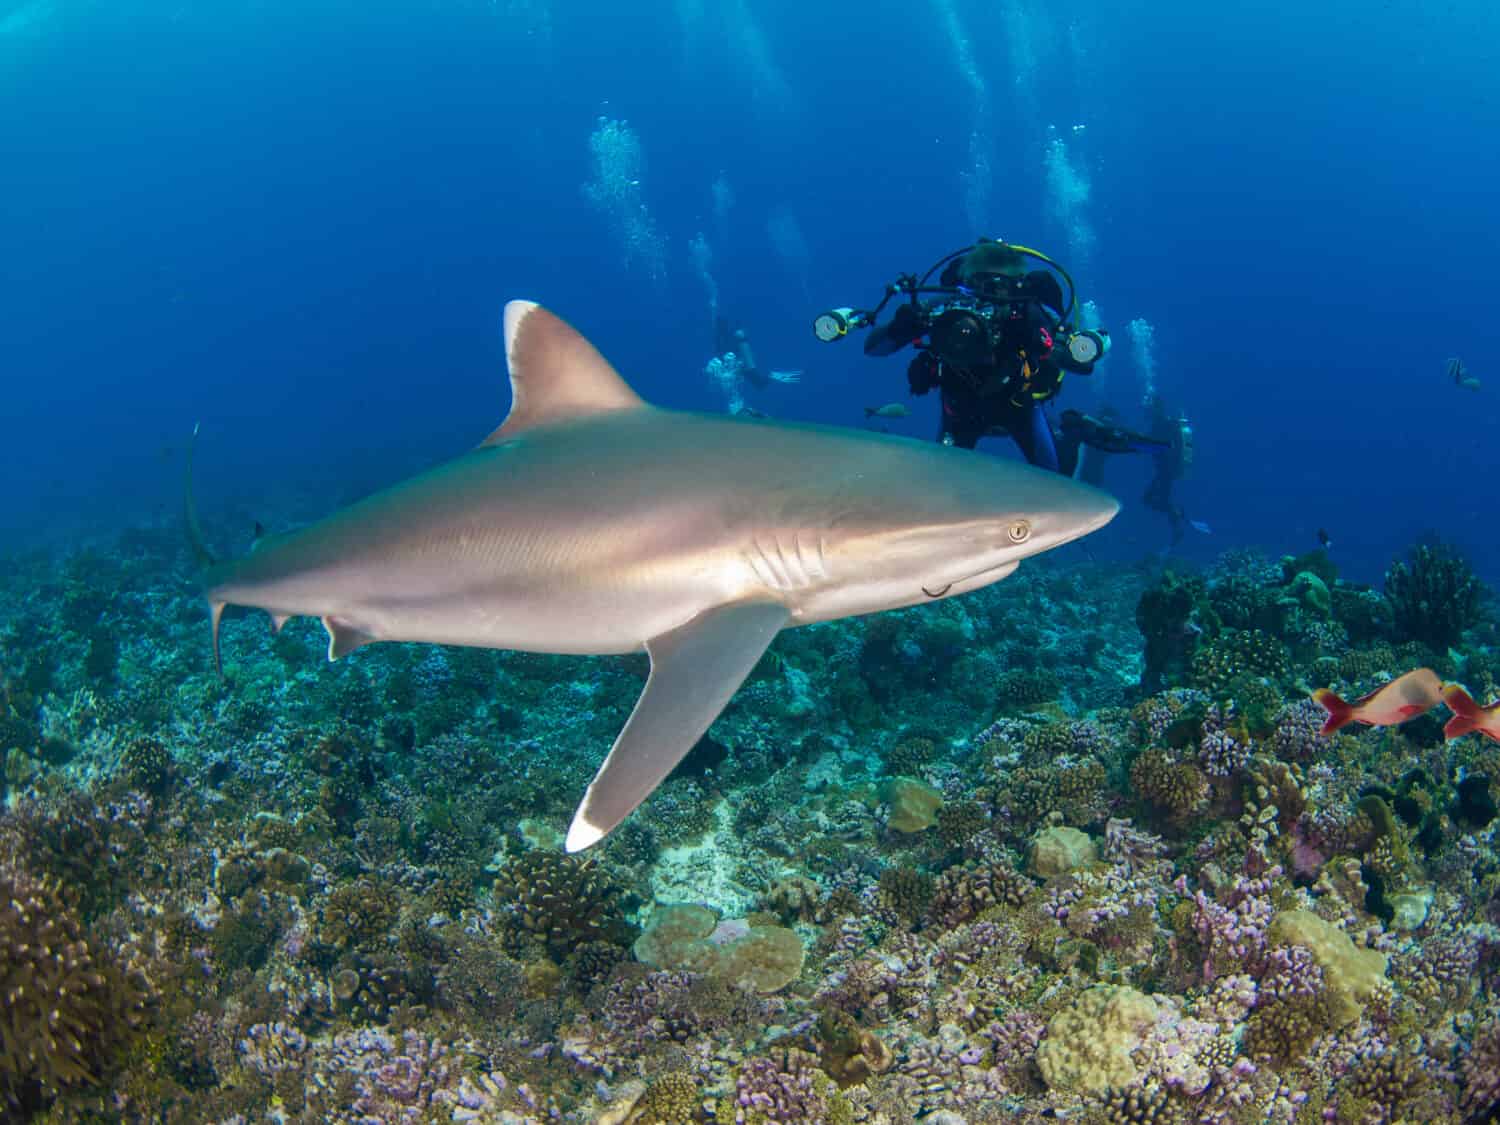 Silvertip shark and scuba diver with a camera in a coral reef (Rangiroa, Tuamotu Islands, French Polynesia in 2012)